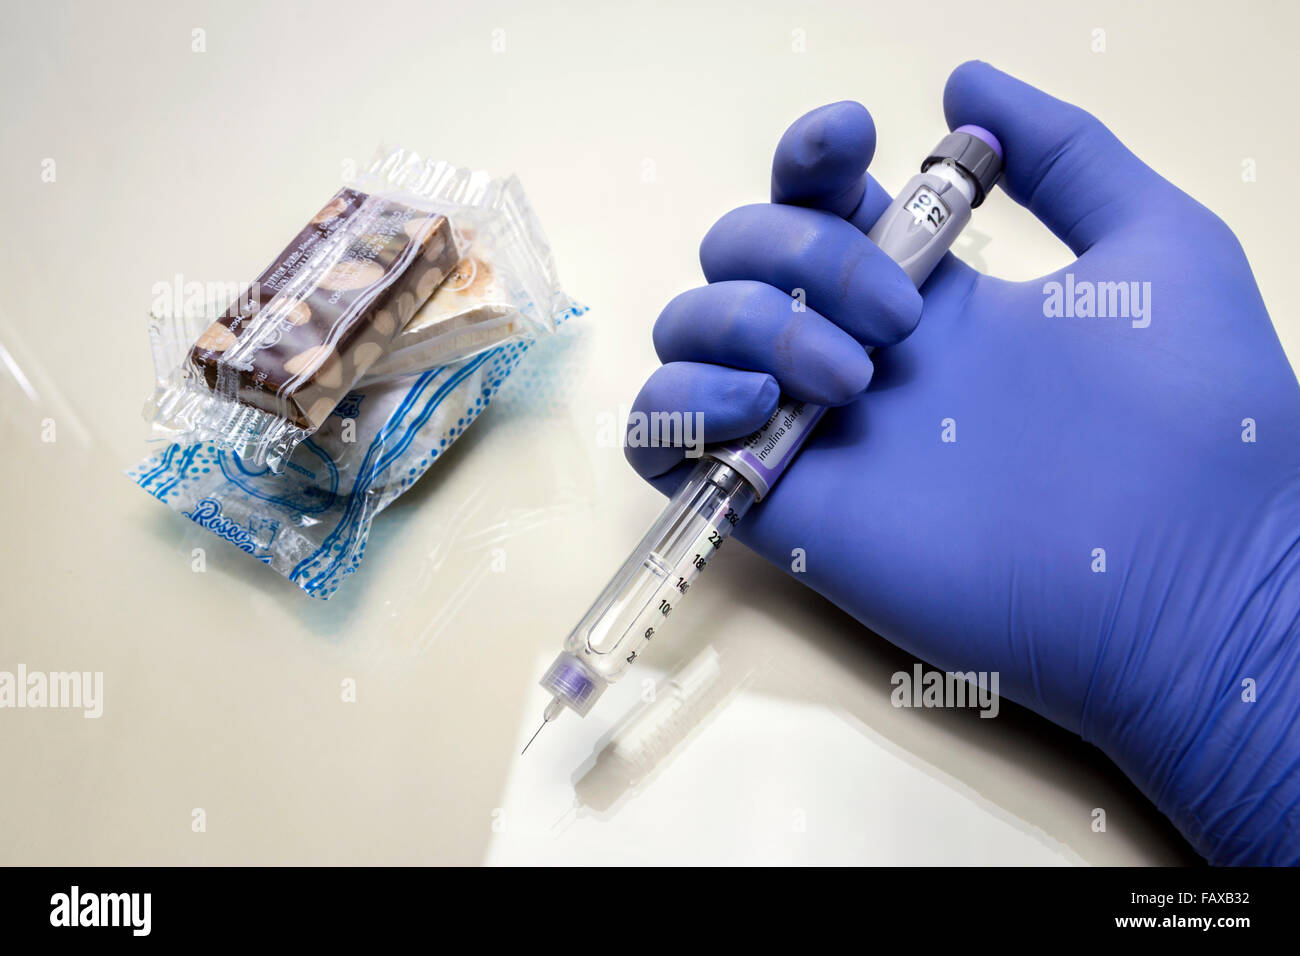 Blue-gloved hand holds a syringe of insulin together with some sweets and packaged cakes. Diabetes concept Stock Photo